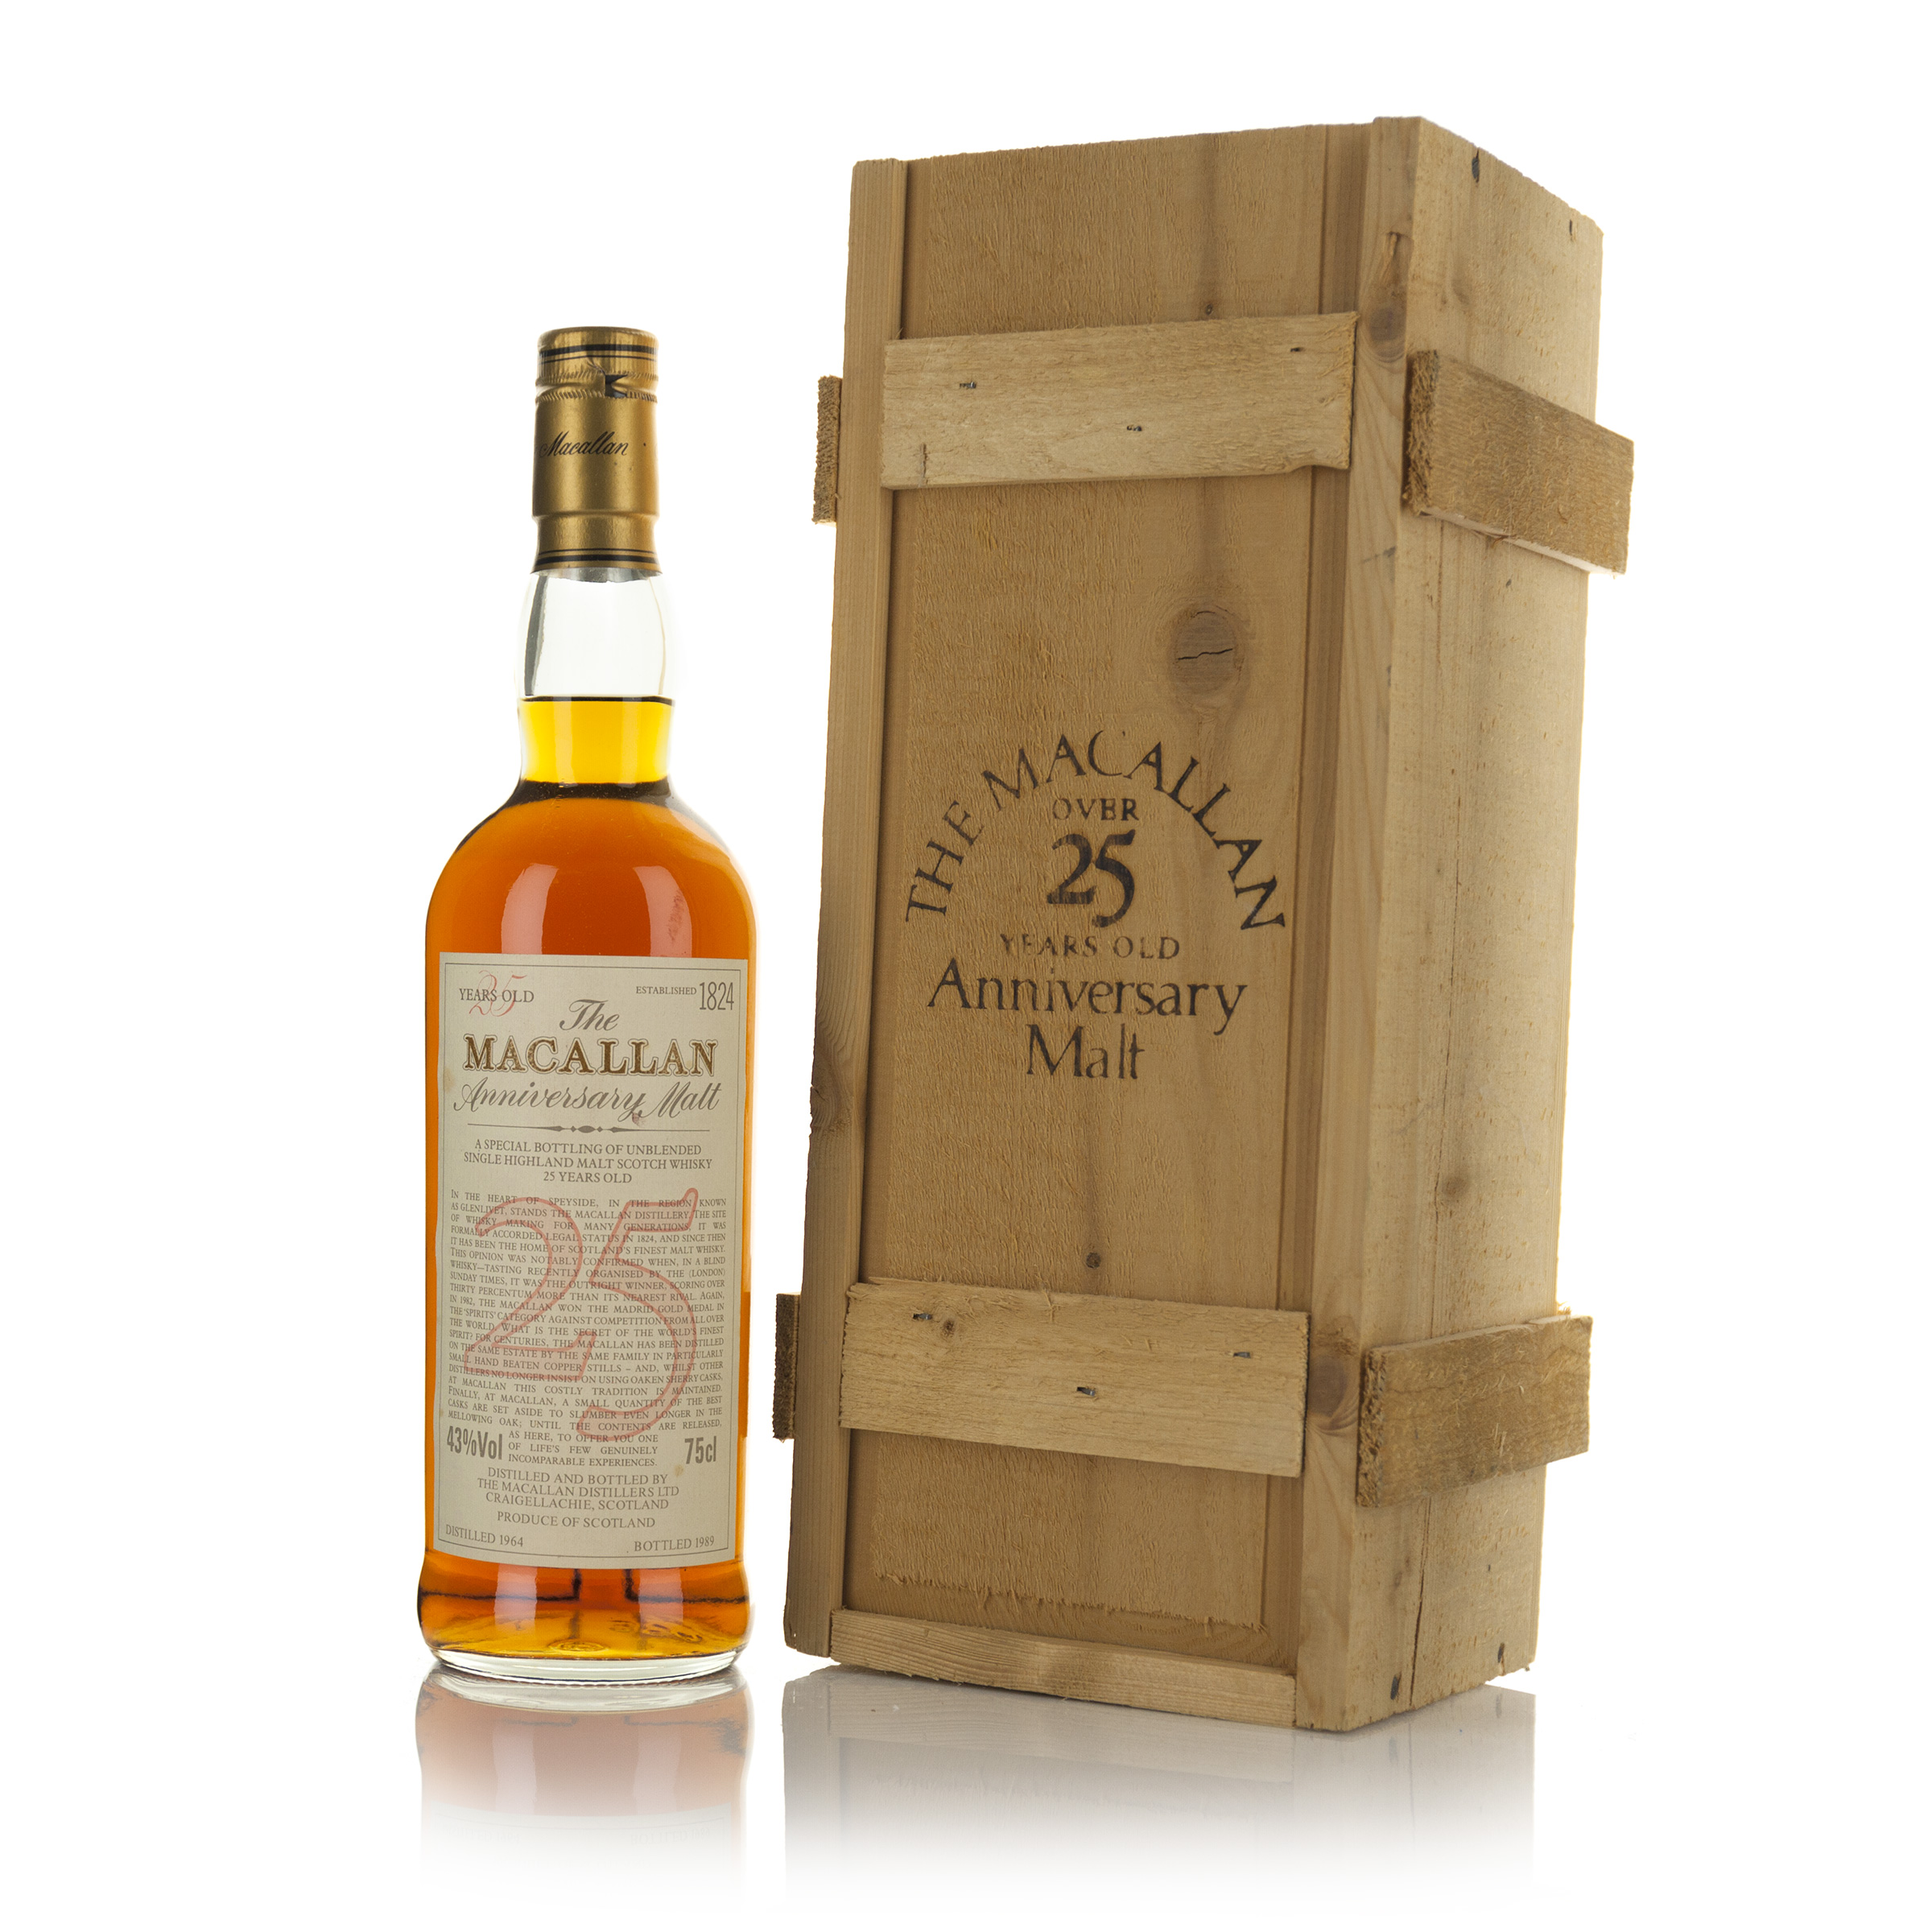 THE MACALLAN 25 ANNIVERSARY SINGLE HIGHLAND MALT SCOTCH WHISKY 25 YEARS (ONE 75 CL)